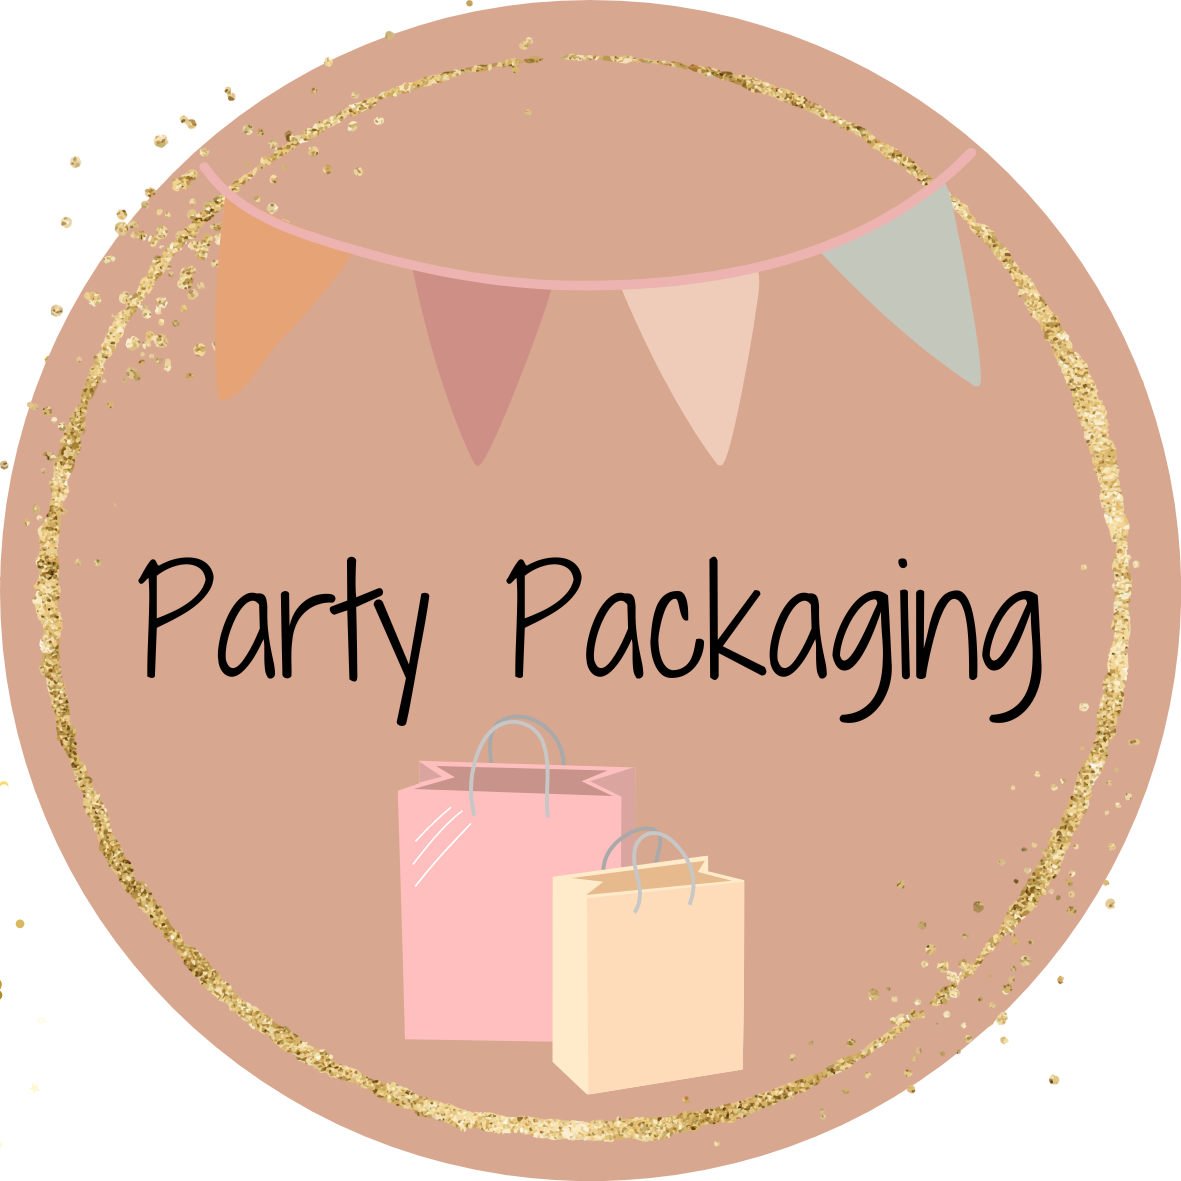 Party Packaging